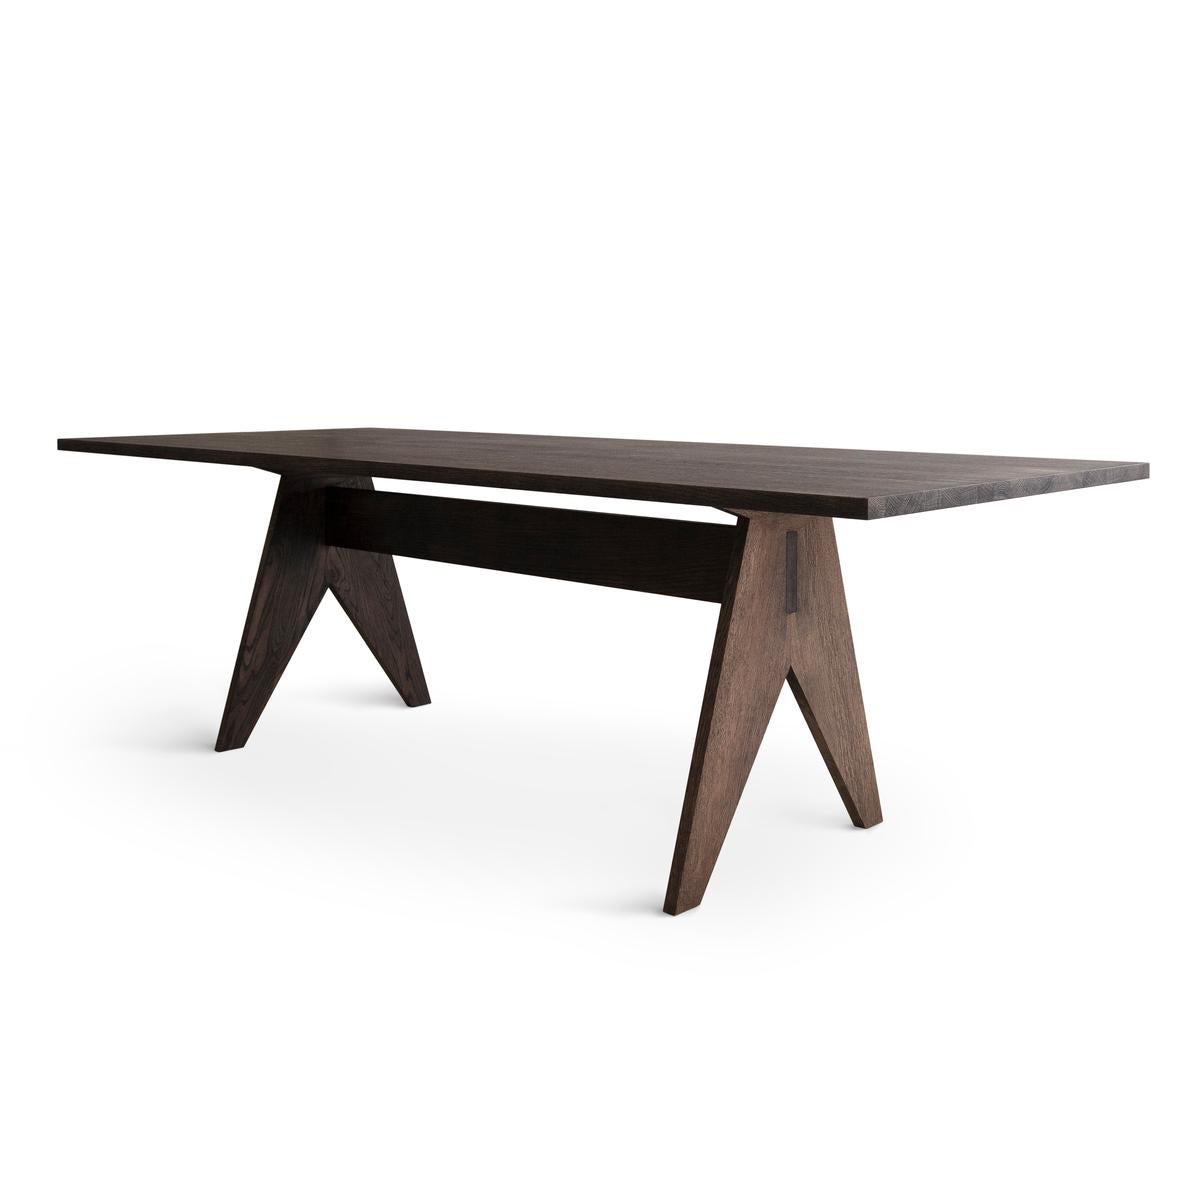 Oak Contemporary Dining Room Table 'POSE', 250, Smoked oak + More Sizes For Sale